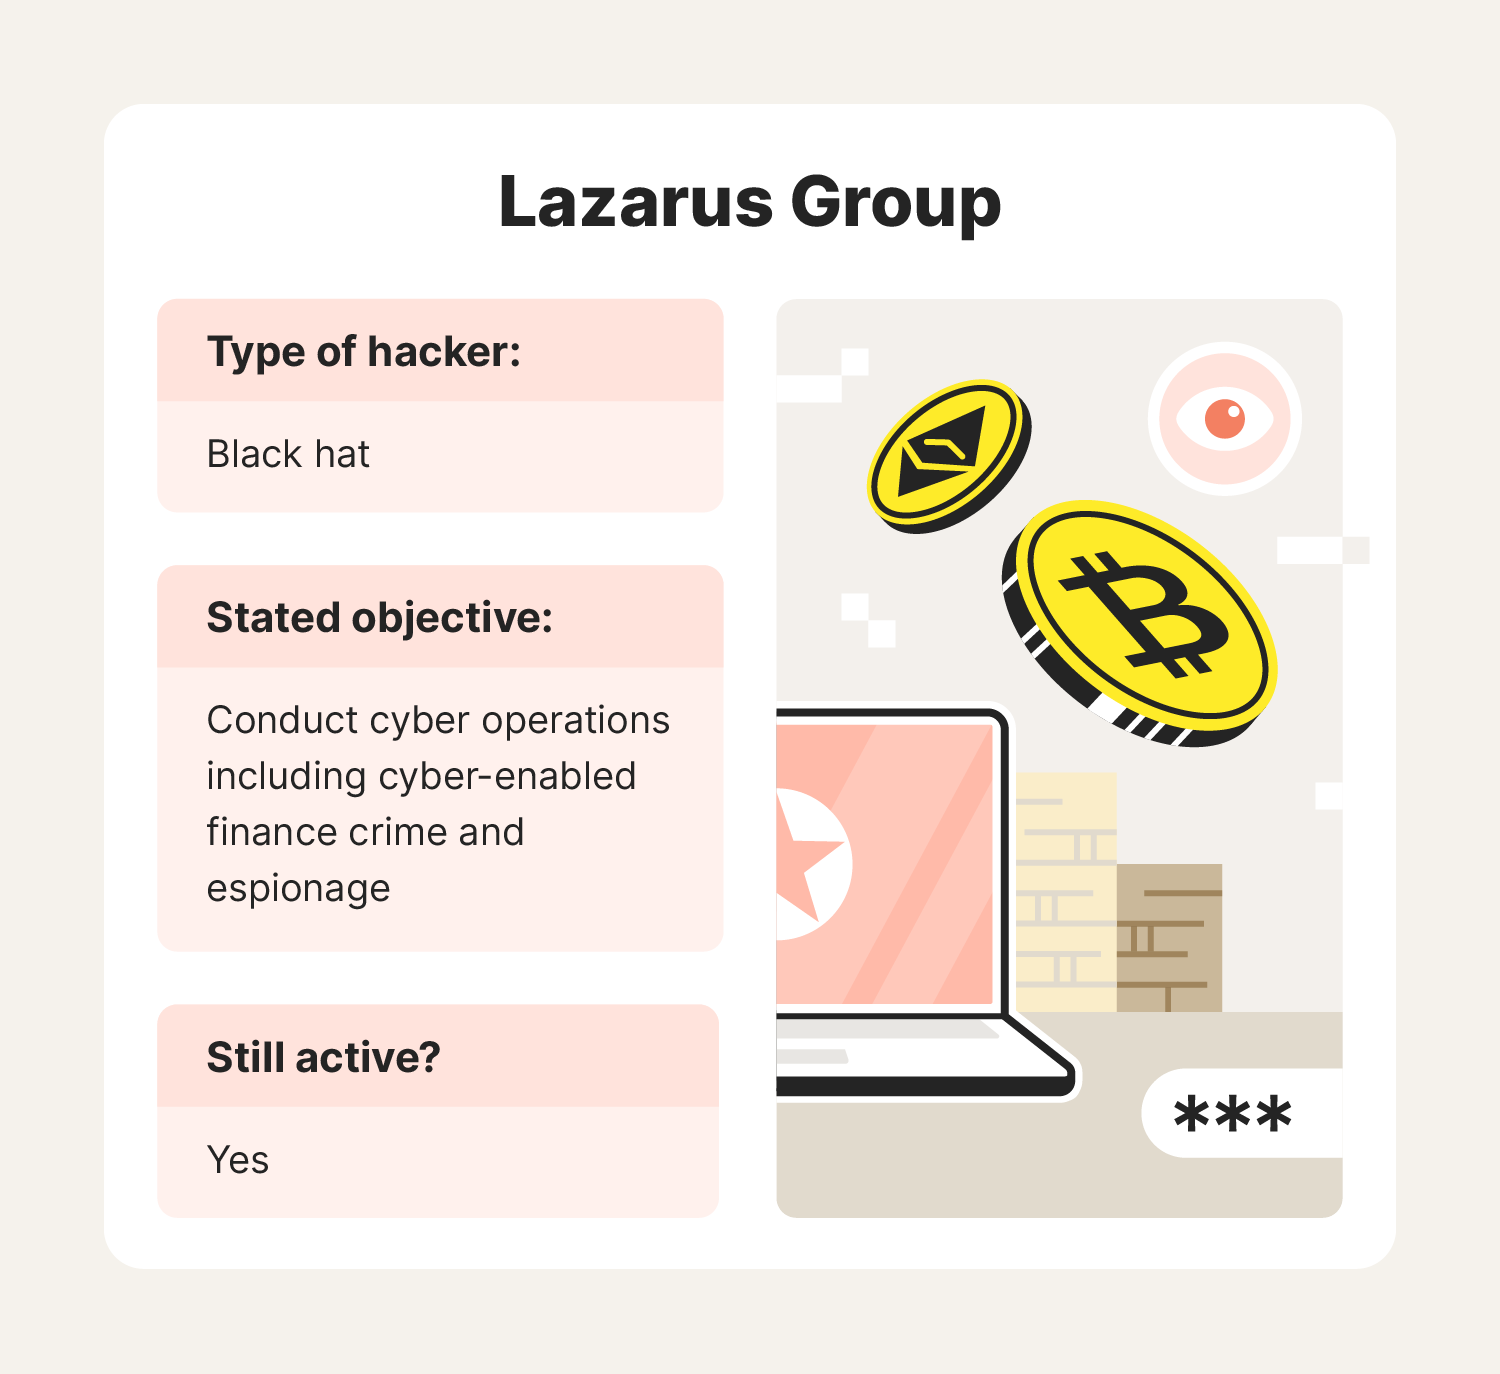 A graphic goes over specific examples of hacker groups, including Lazarus Group.